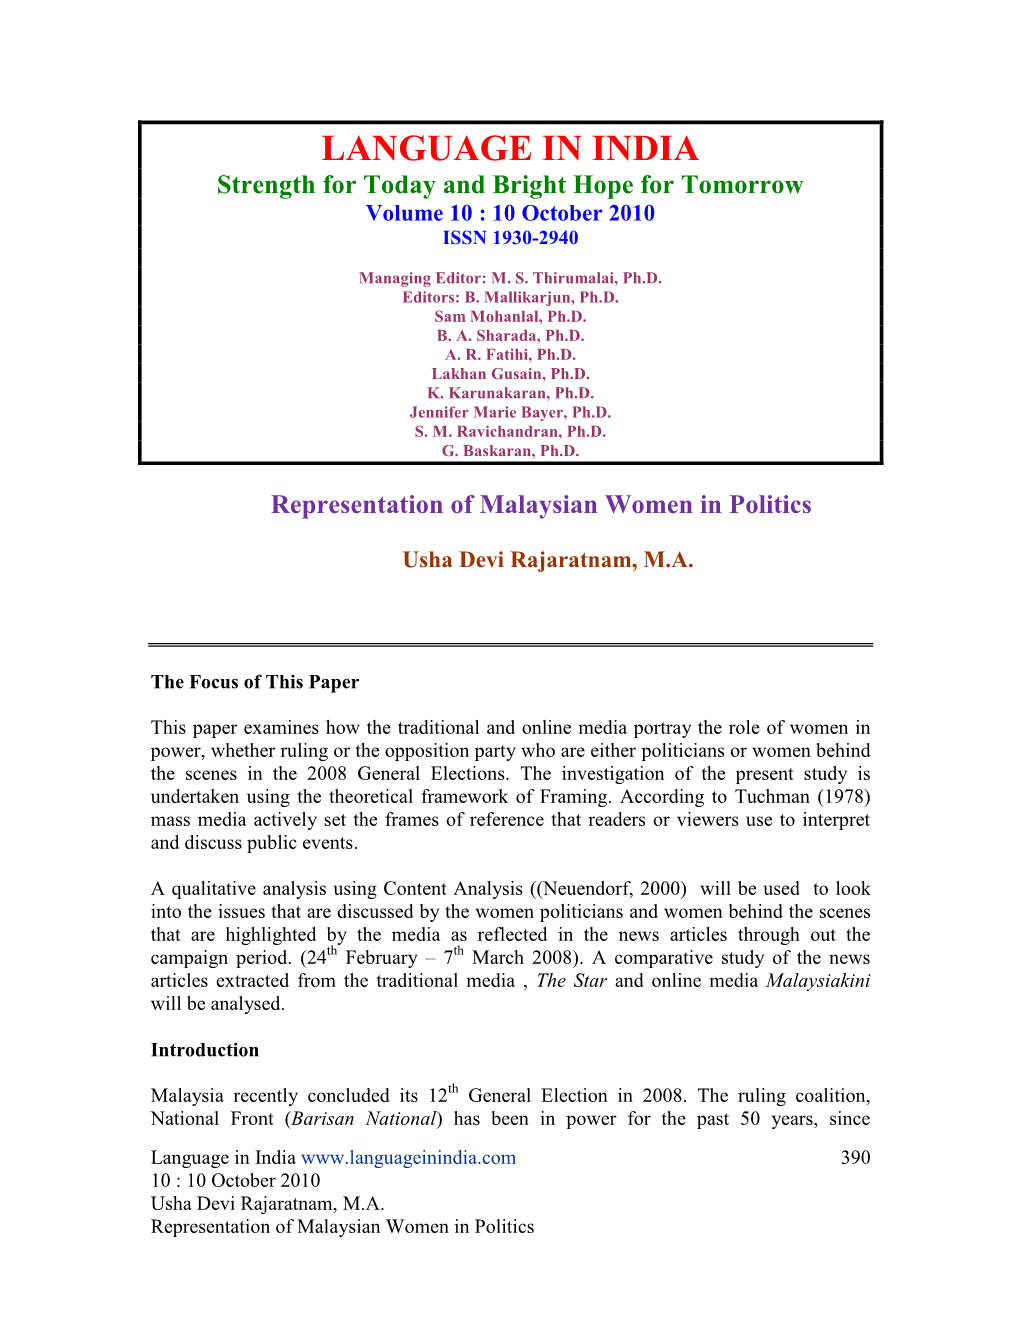 Women in Malaysia Have Been Involved in Politics Since the Pre